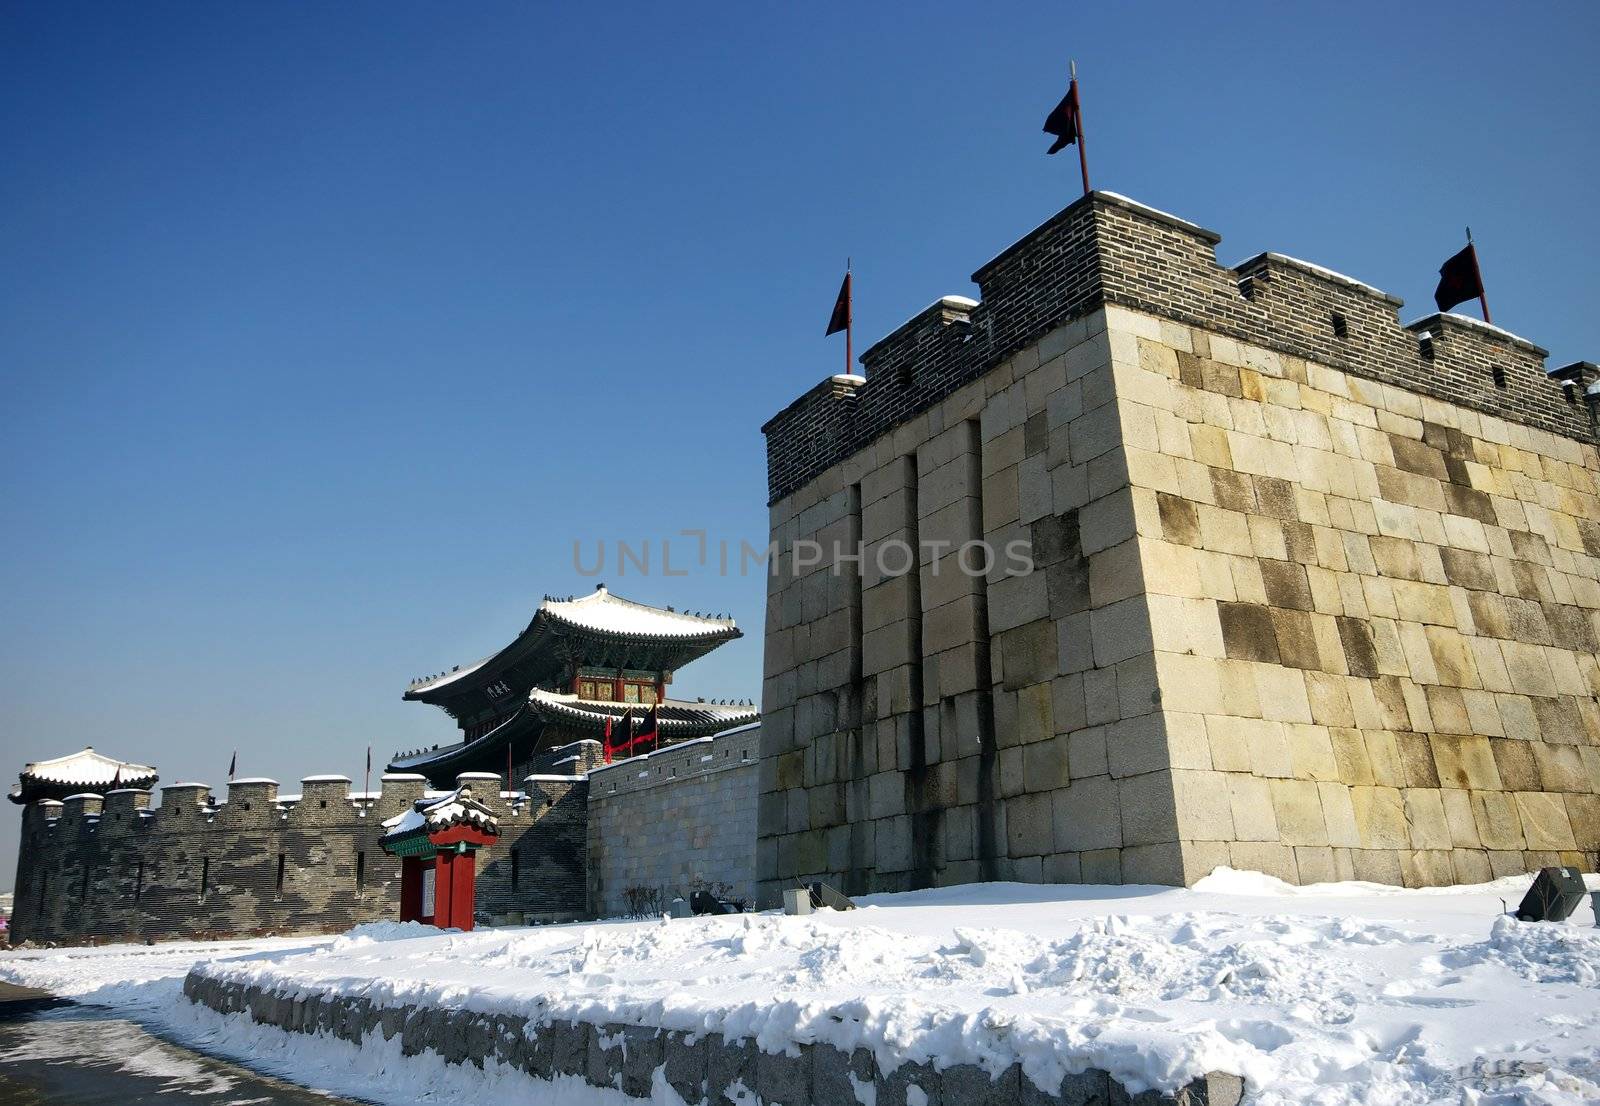 Hwaseong Fortress in the snow. Hwaseong is a UNESCO World Heritage site located in Suwon City, South Korea.